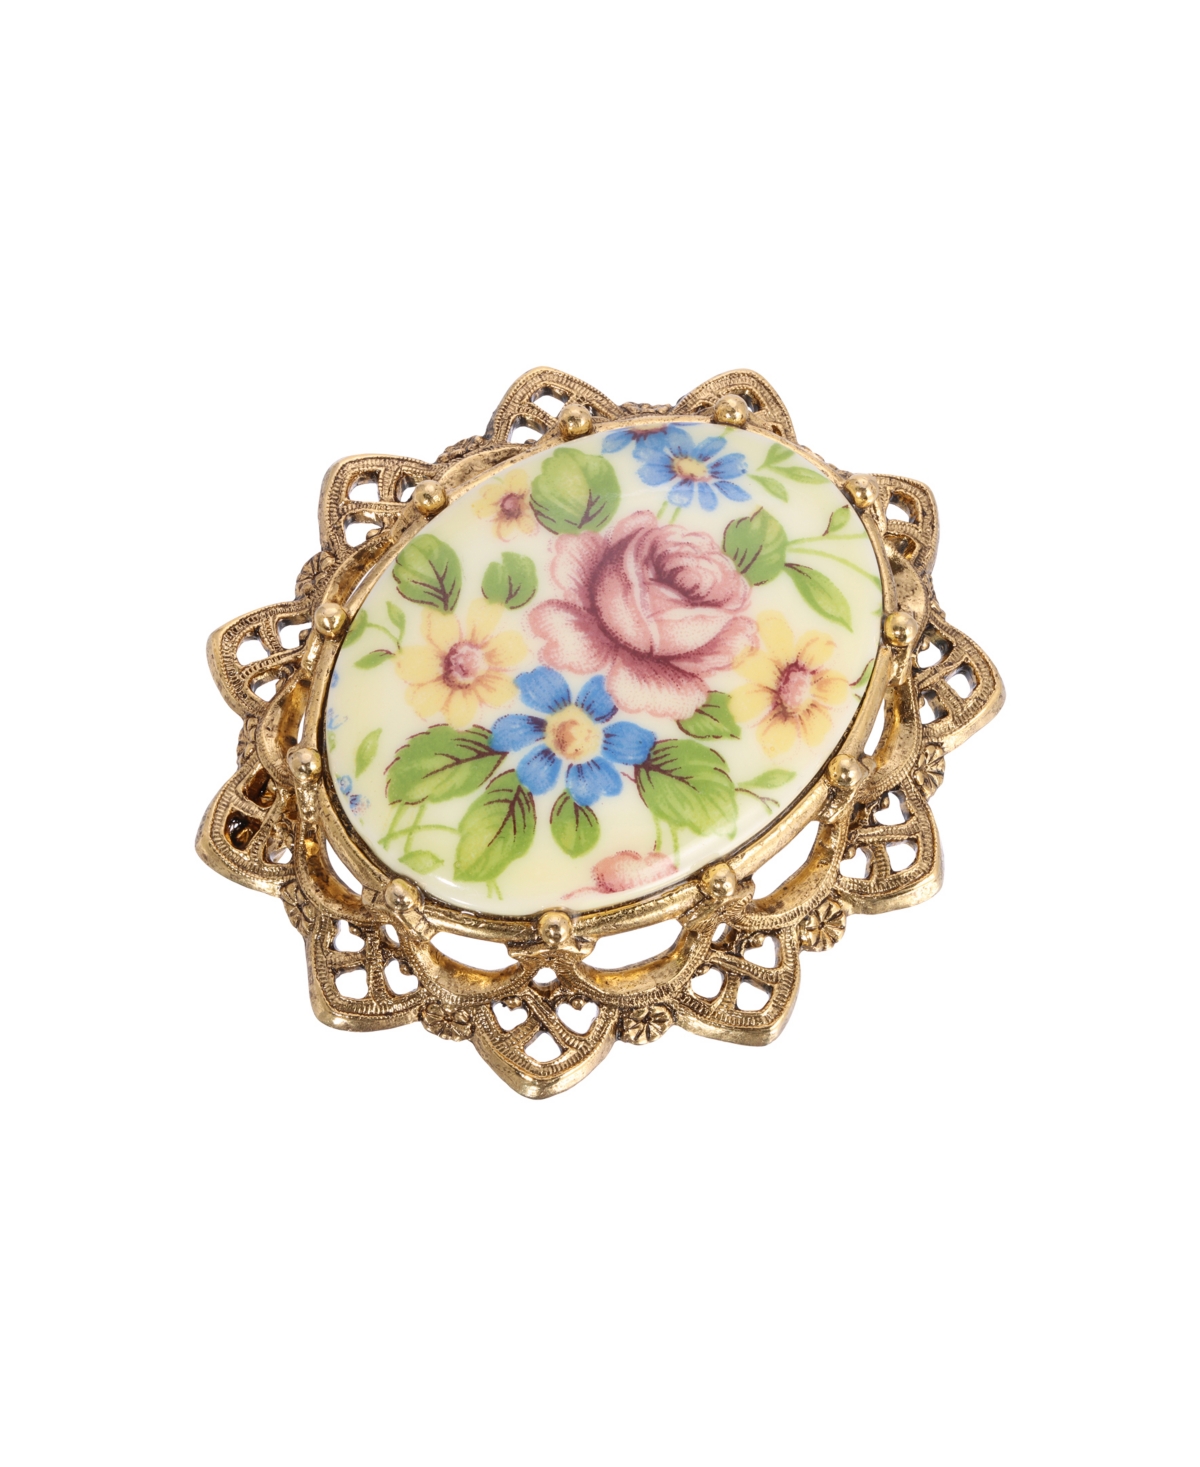 Glass Oval Floral Brooch - Gold